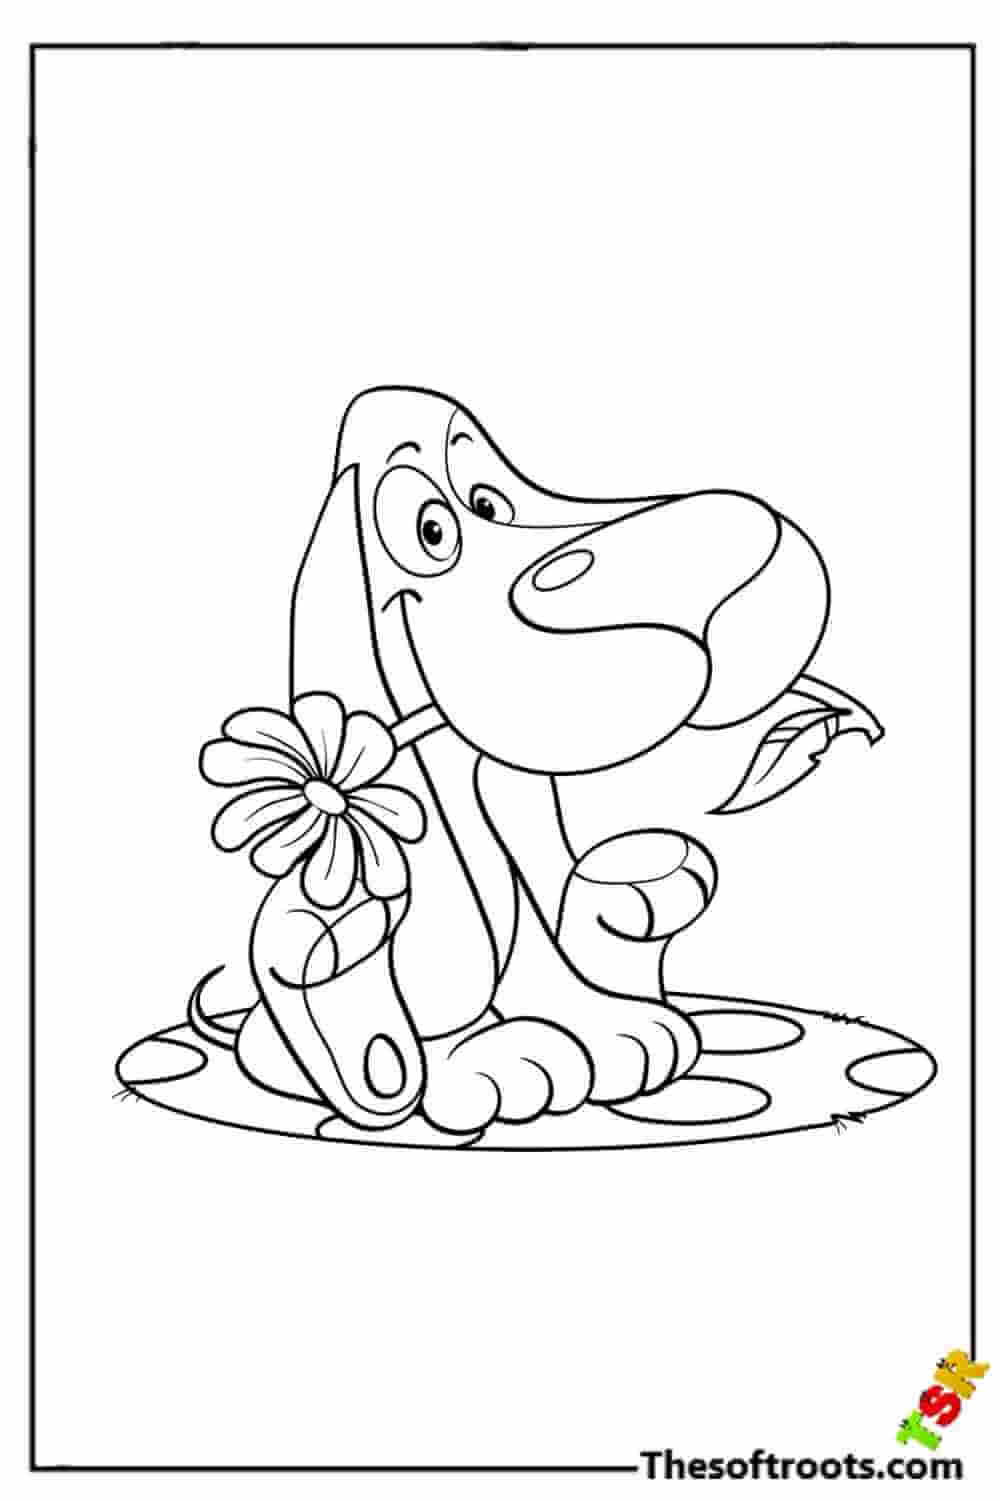 Puppy dog for kids coloring pages